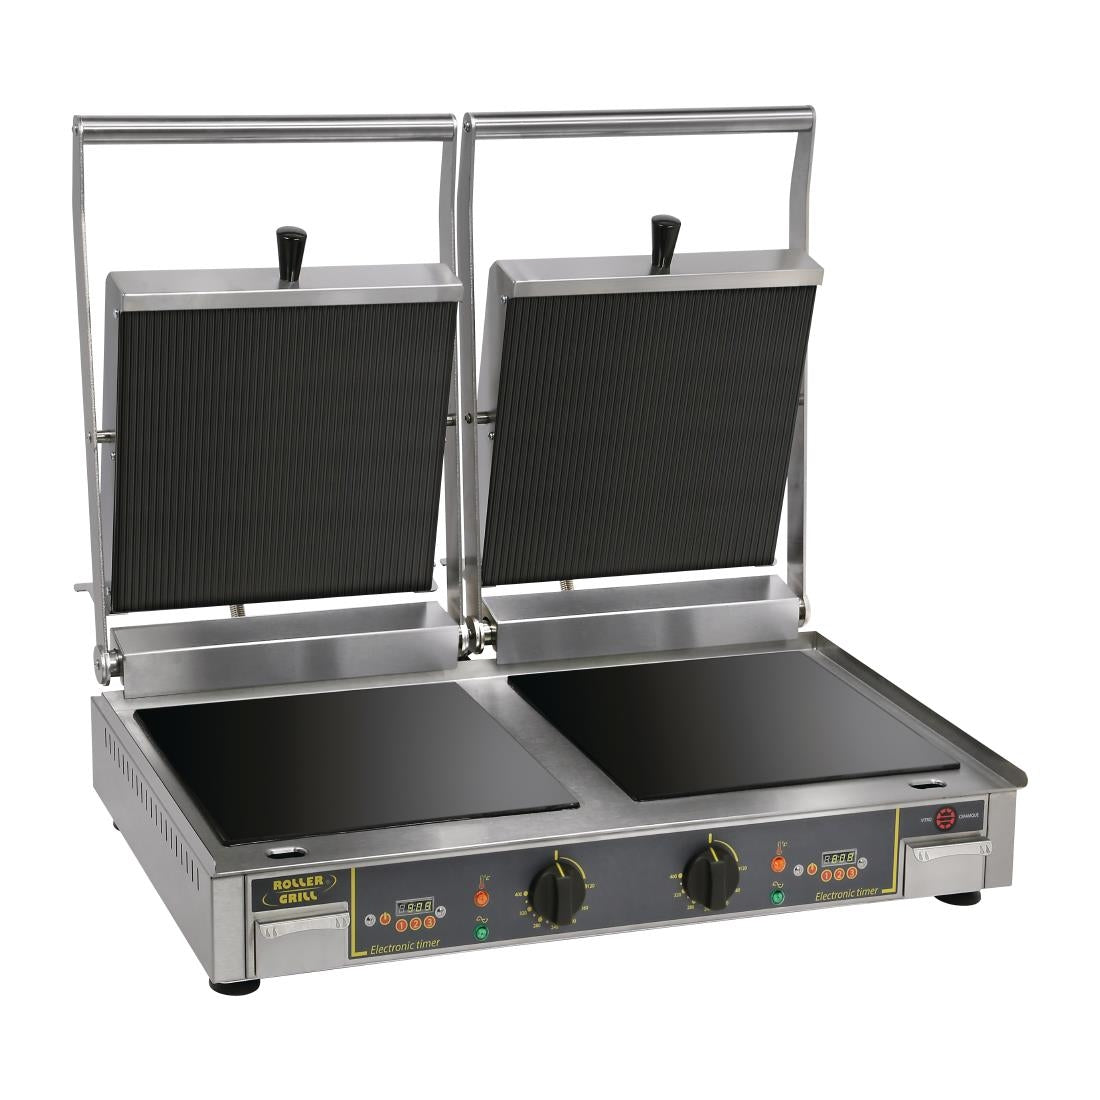 FE148 Roller Grill Premium VC DL Double Ribbed Contact Grill JD Catering Equipment Solutions Ltd